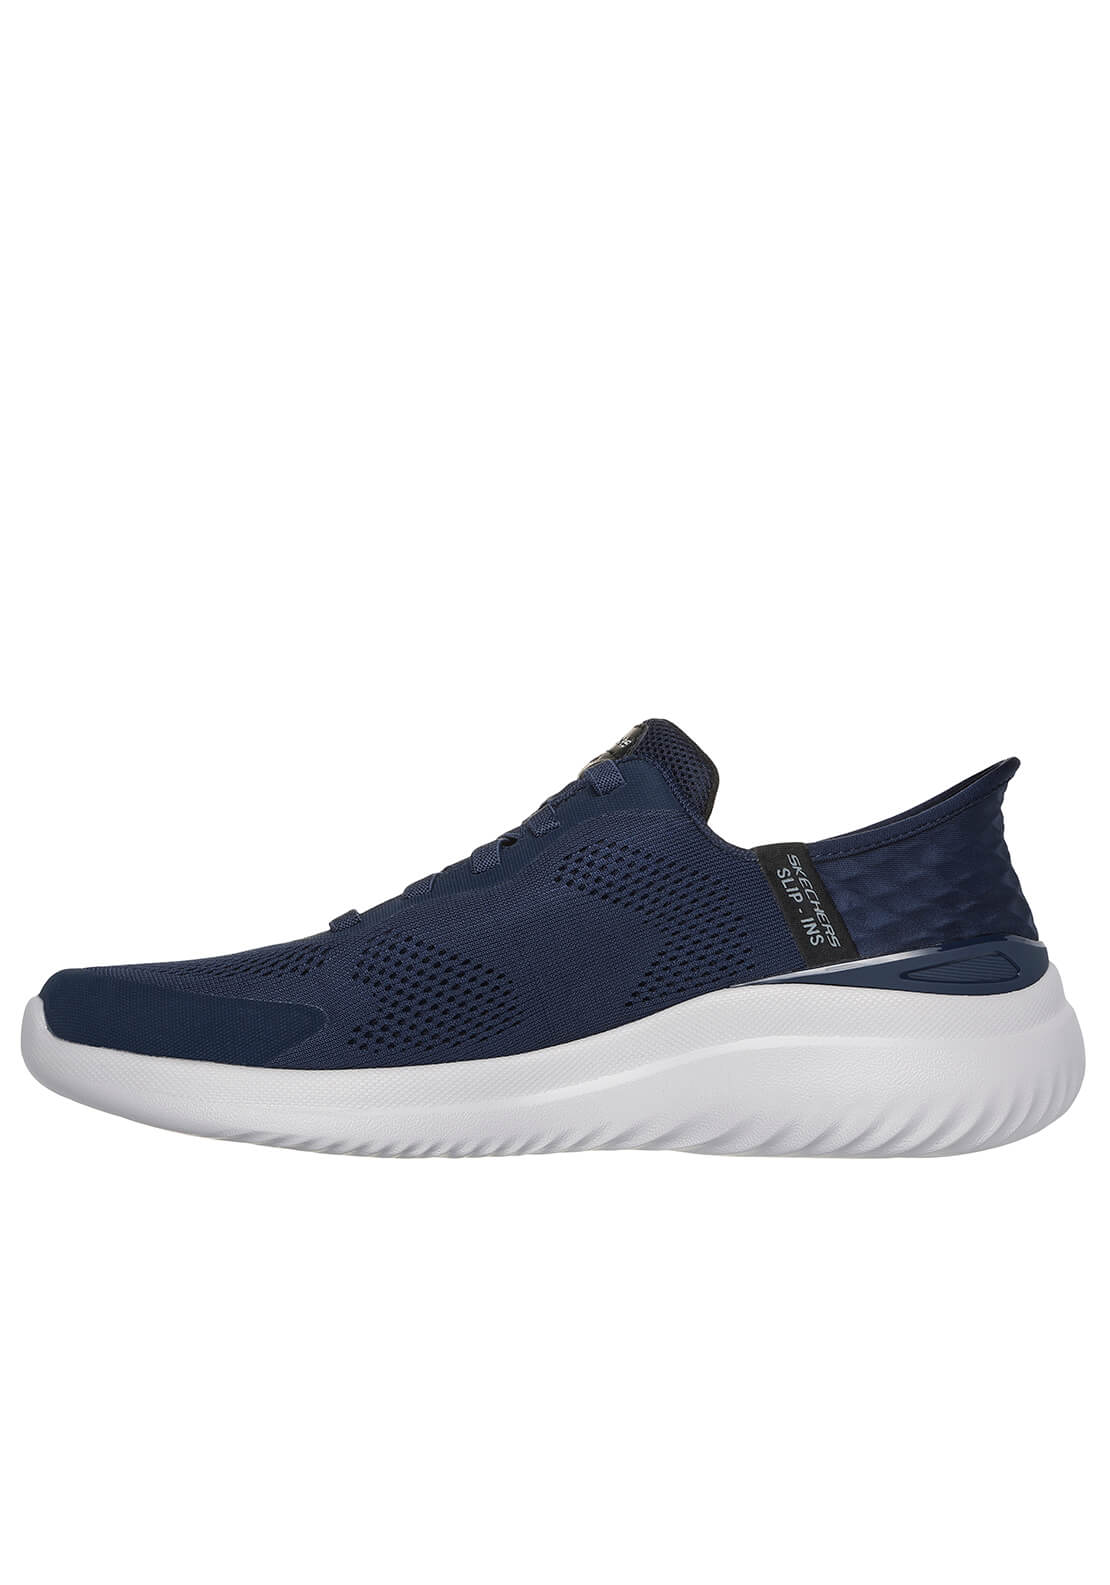 Skechers Bounder 2.0 Emerged - Navy 2 Shaws Department Stores